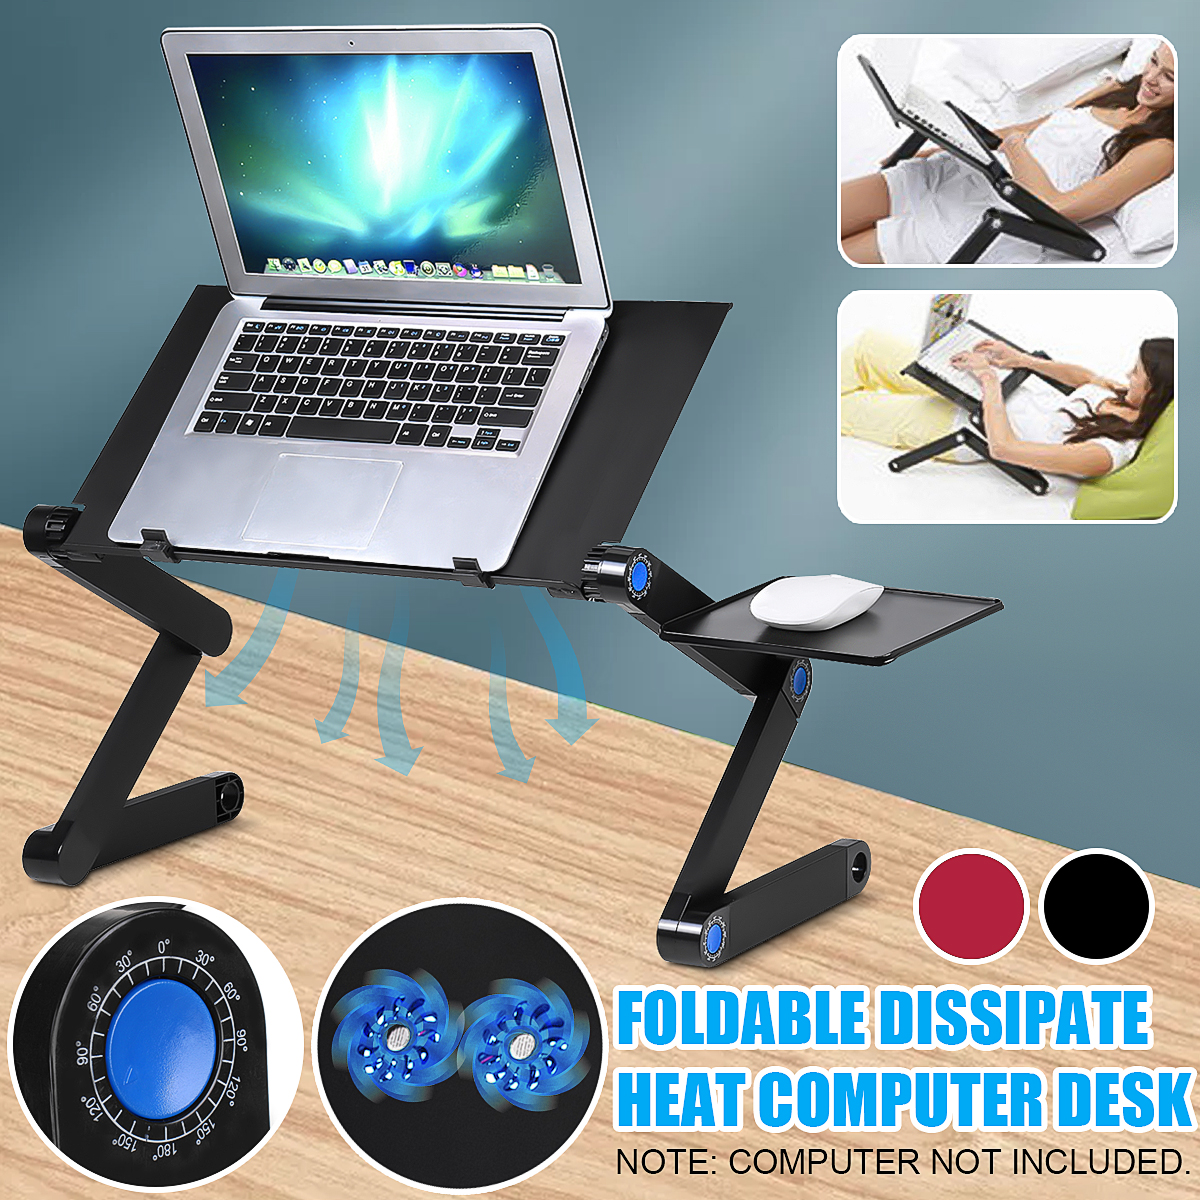 Cooling-Laptop-Desk-360-Degree-Aluminum-Alloy-Adjustable-Foldable-Cooling-Notebook-Table-for-Sofa-Be-1786133-1